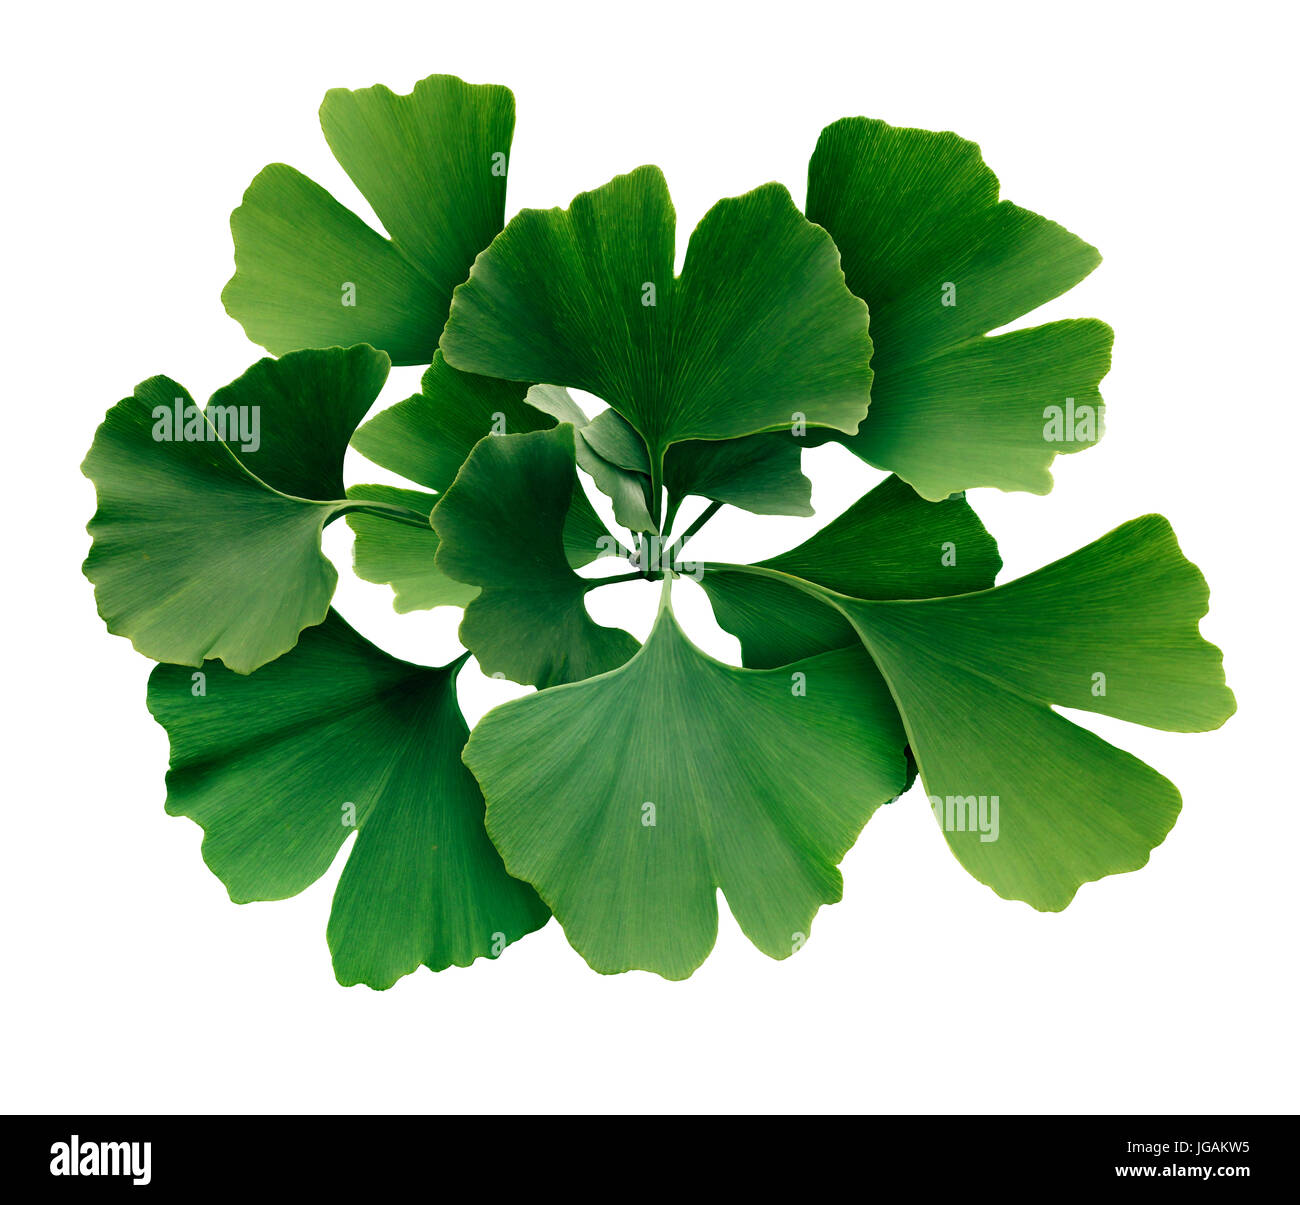 Ginkgo Biloba isolated on a white background as a symbol for traditional medicine representing natural medicinal benefits as a homeopathy symbol. Stock Photo